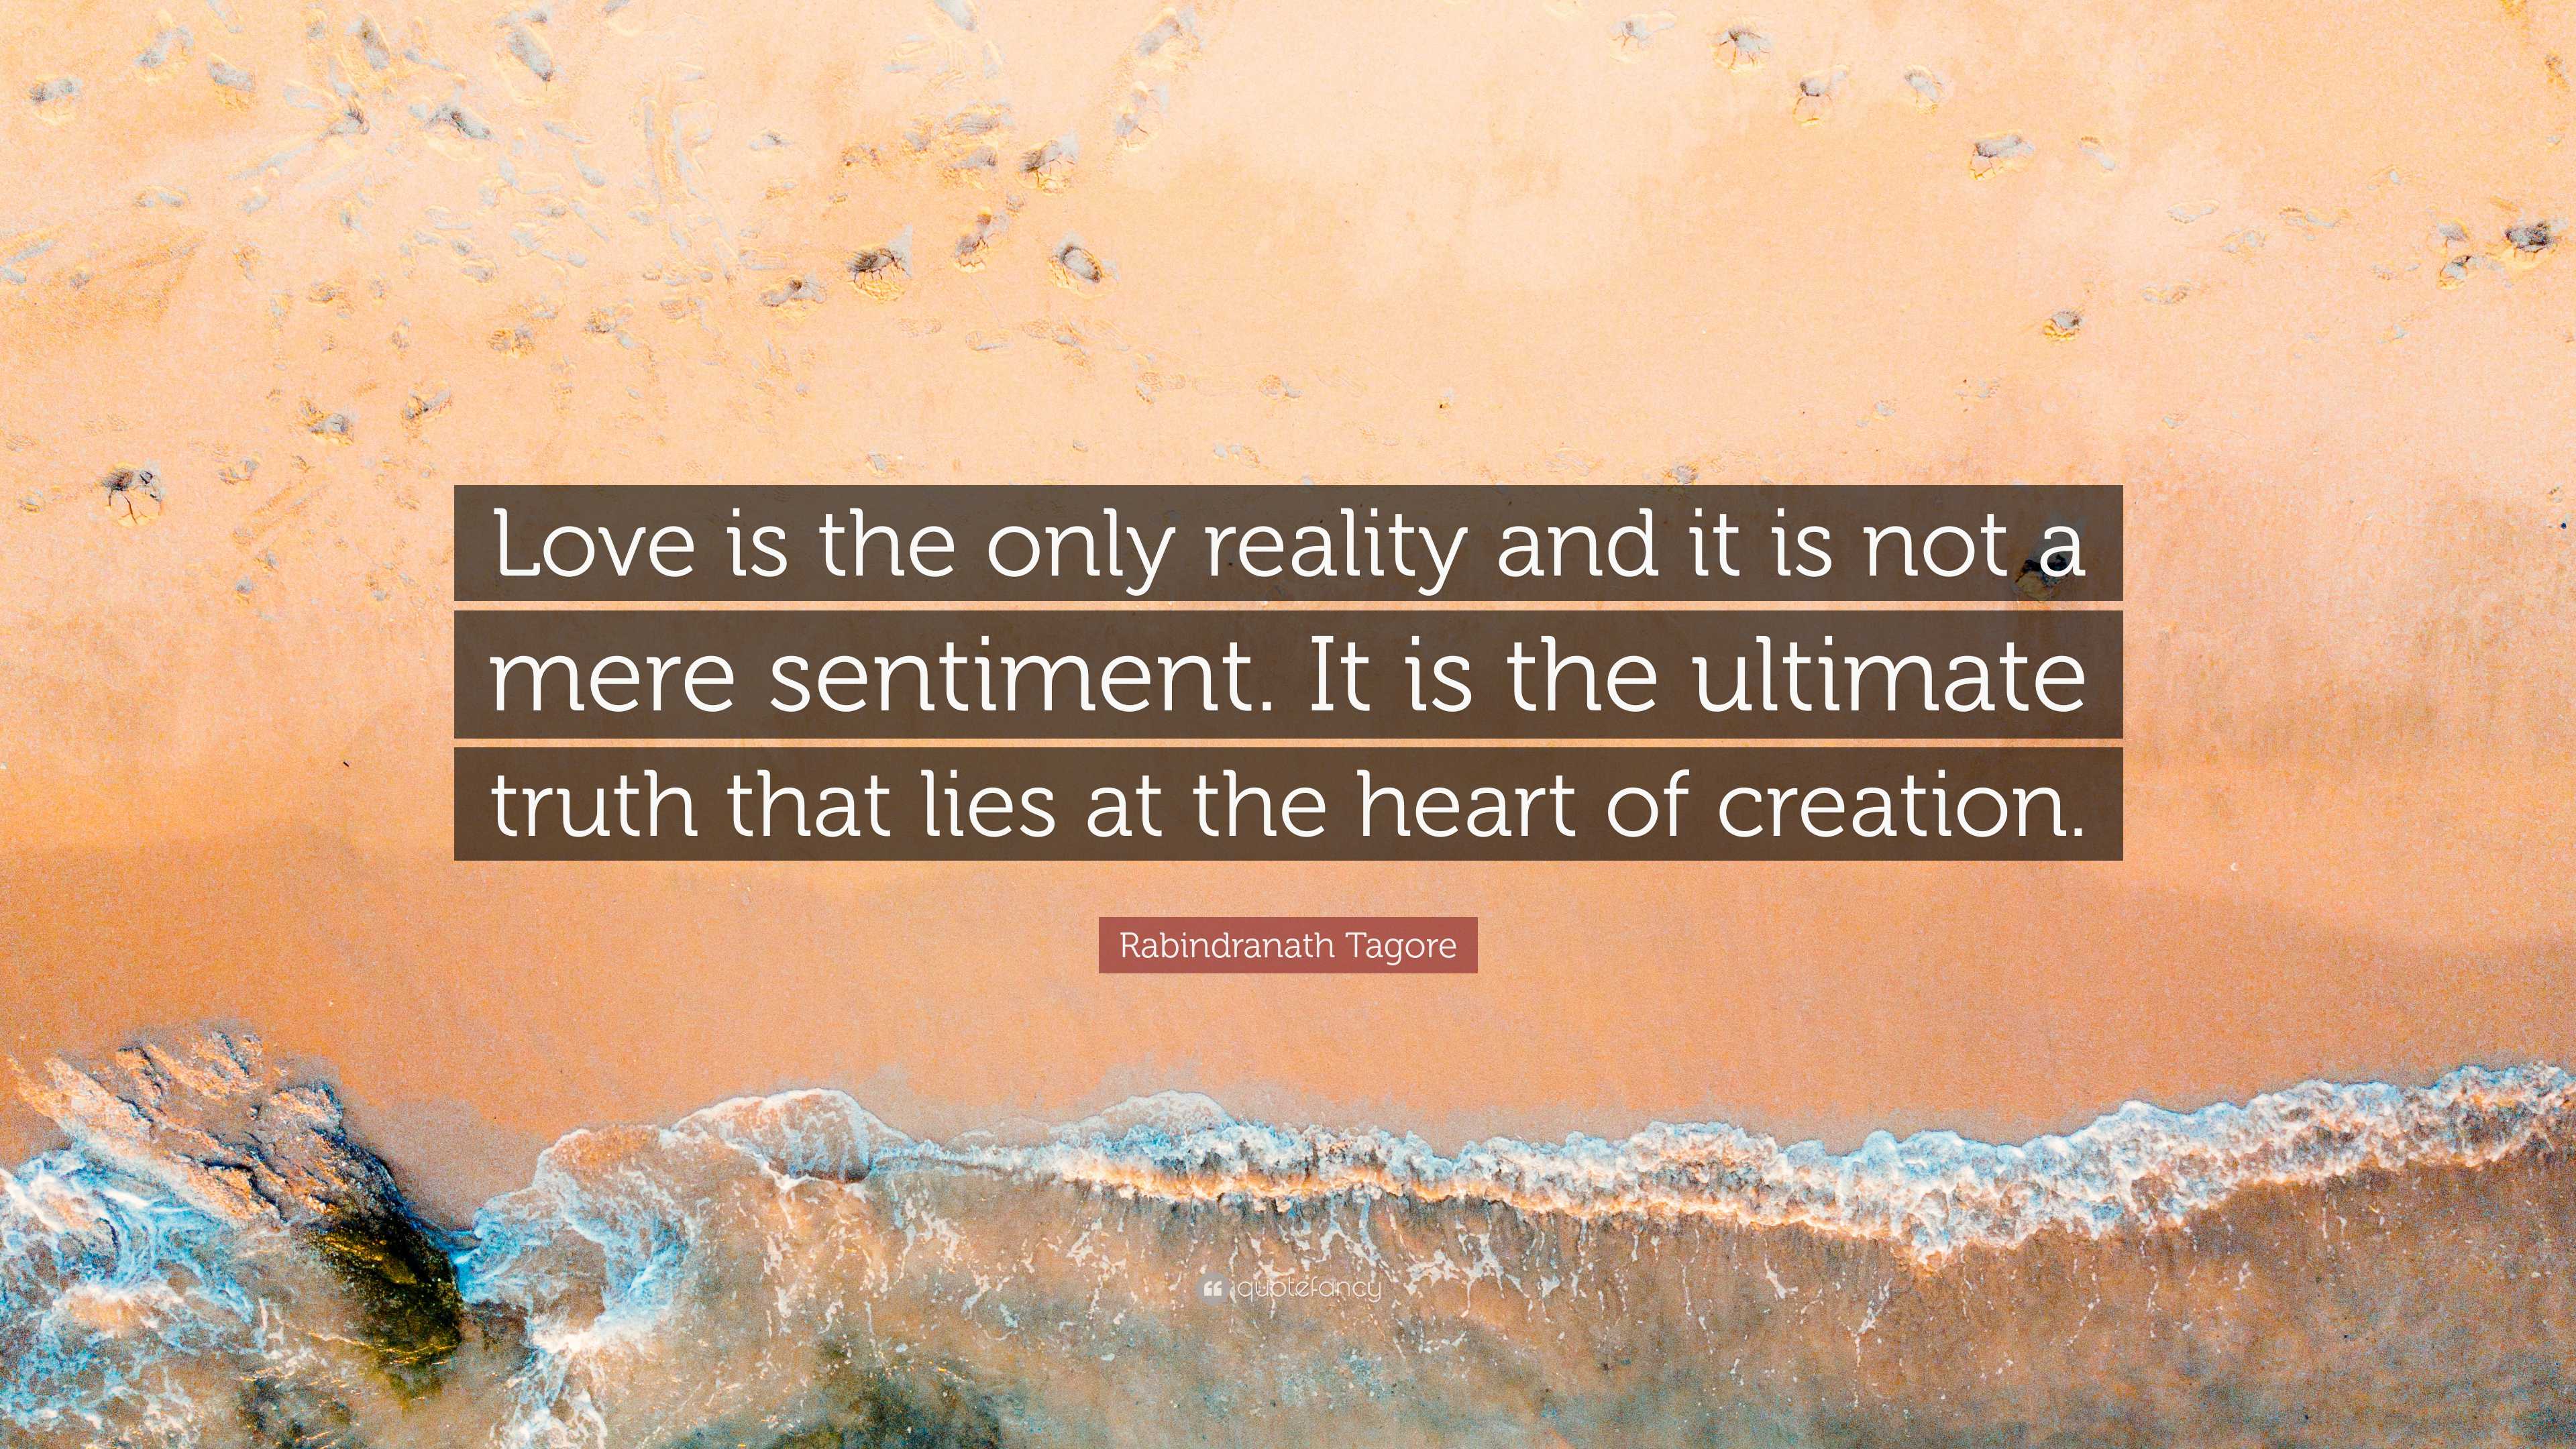 Rabindranath Tagore Quote: “Love is the only reality and it is not a ...